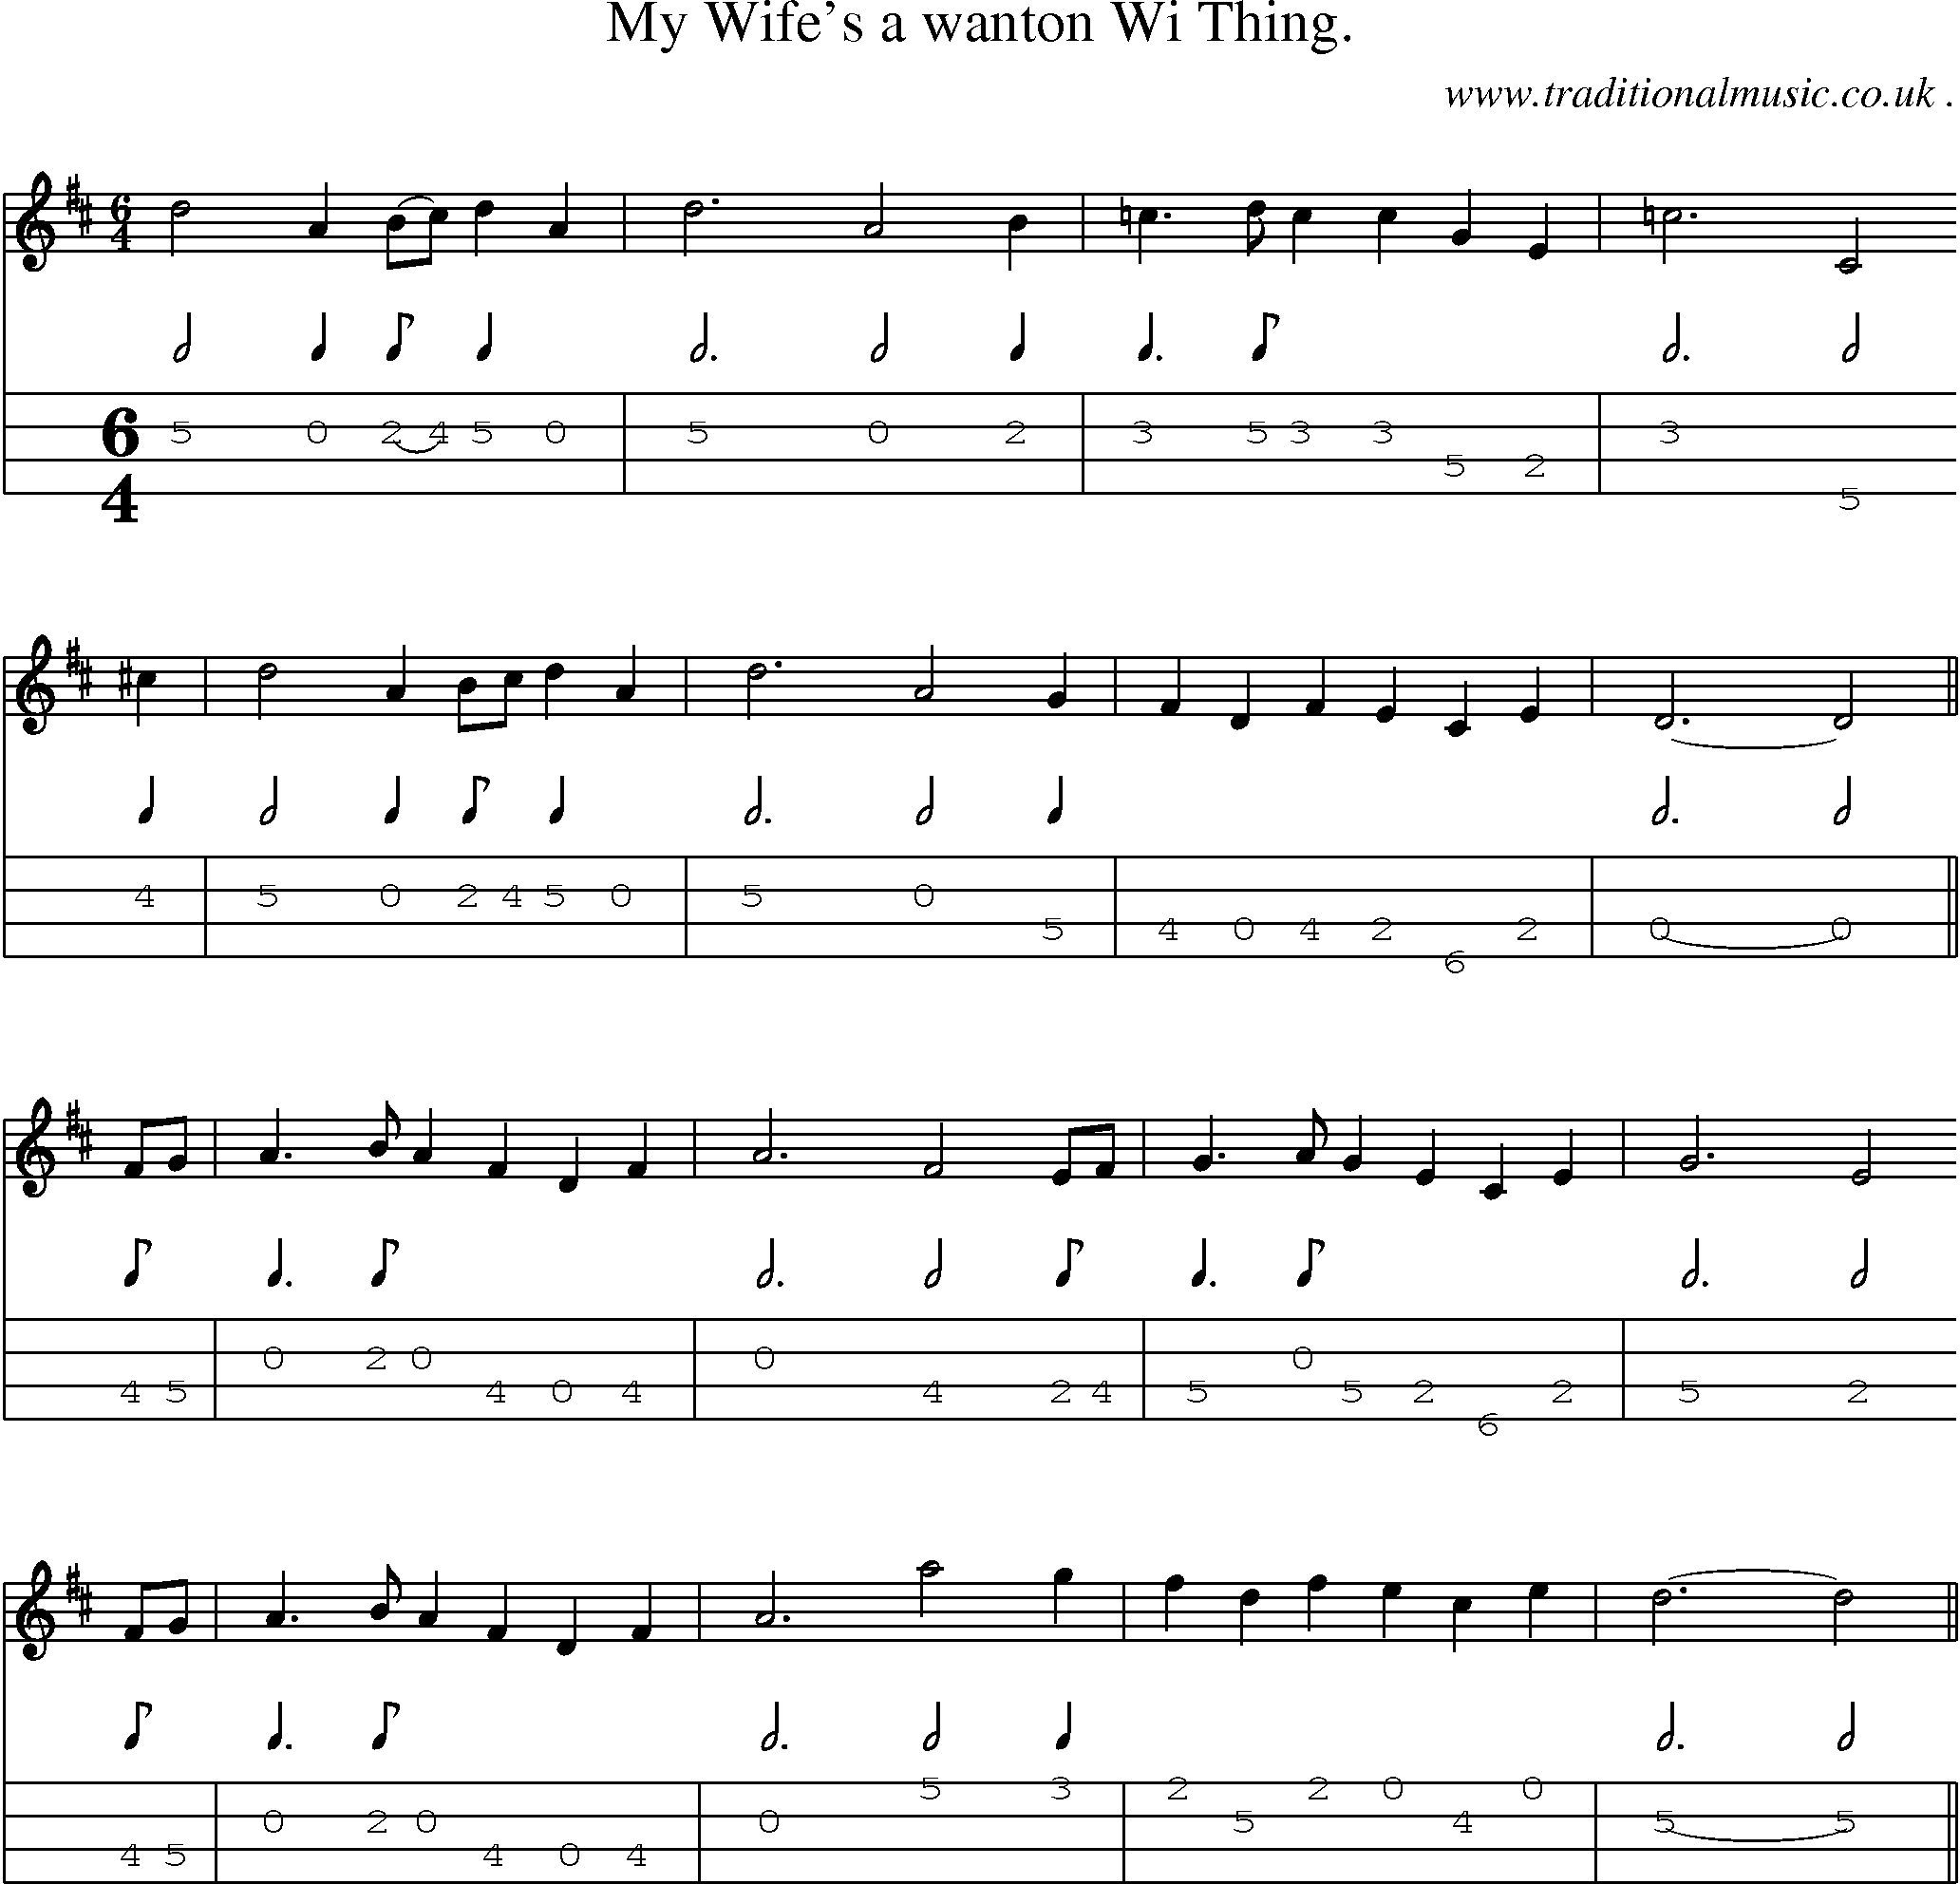 Sheet-Music and Mandolin Tabs for My Wifes A Wanton Wi Thing